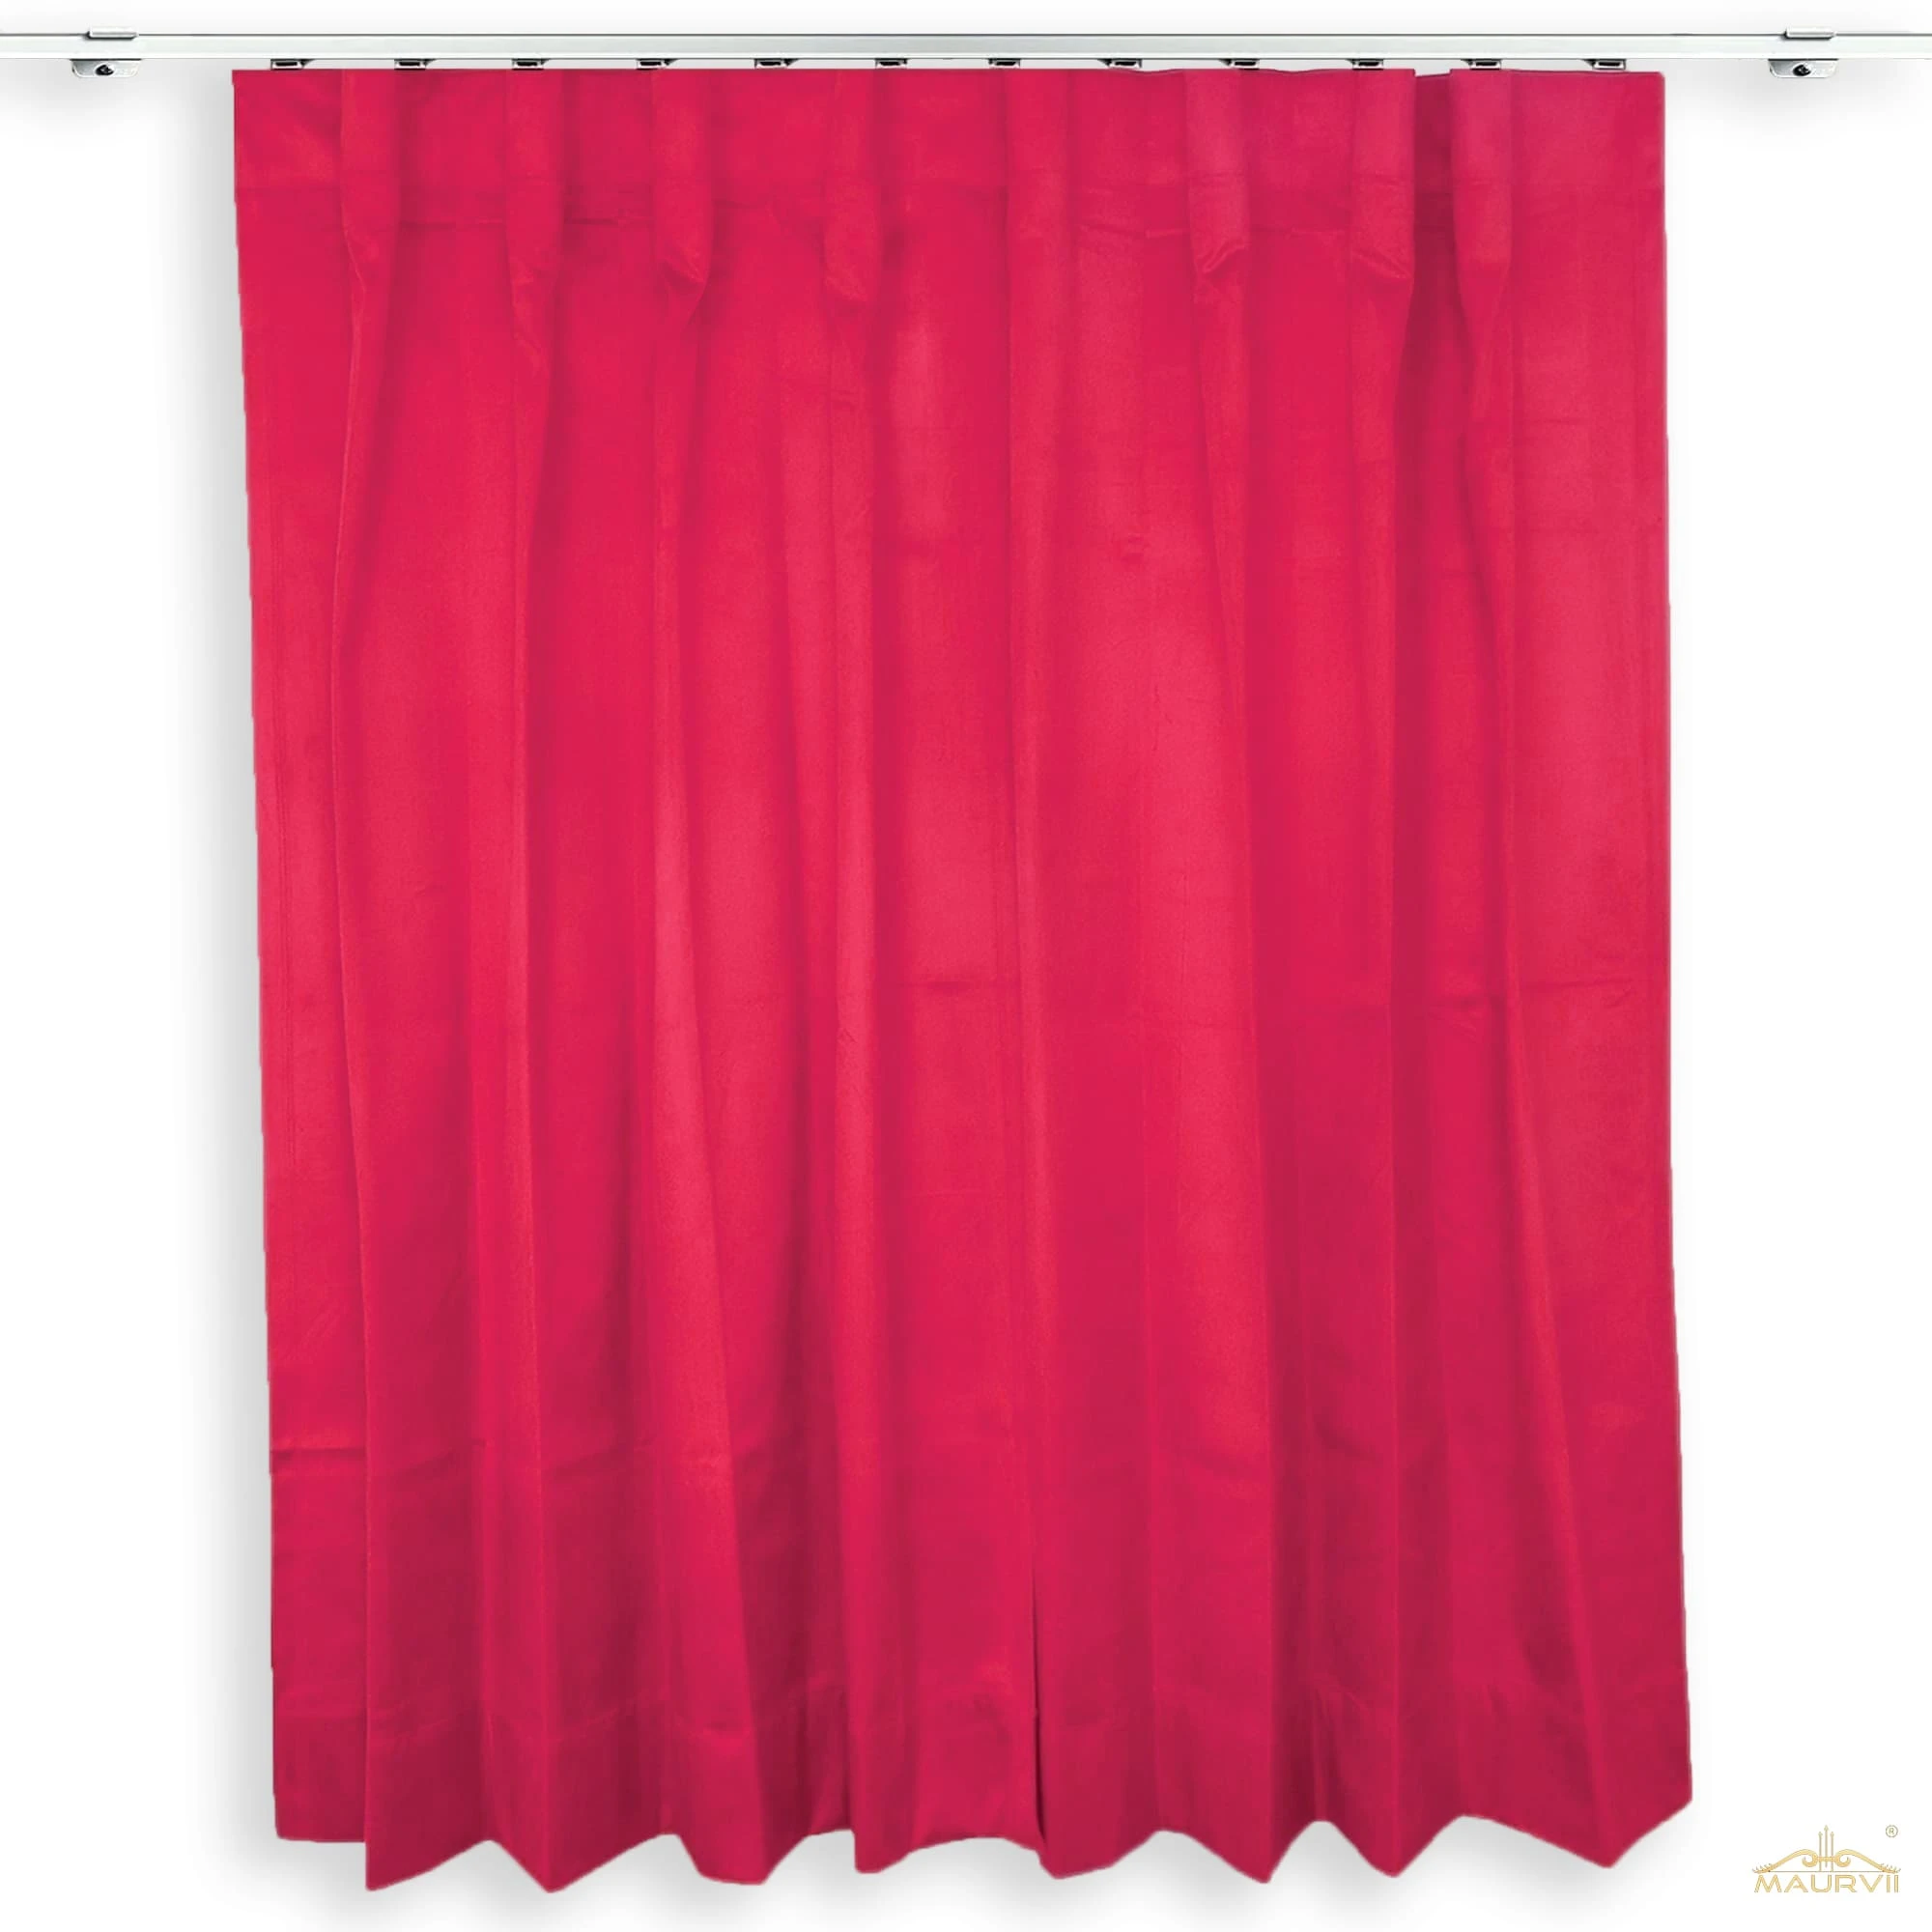 Triple pleated velvet curtains in pinkish red color